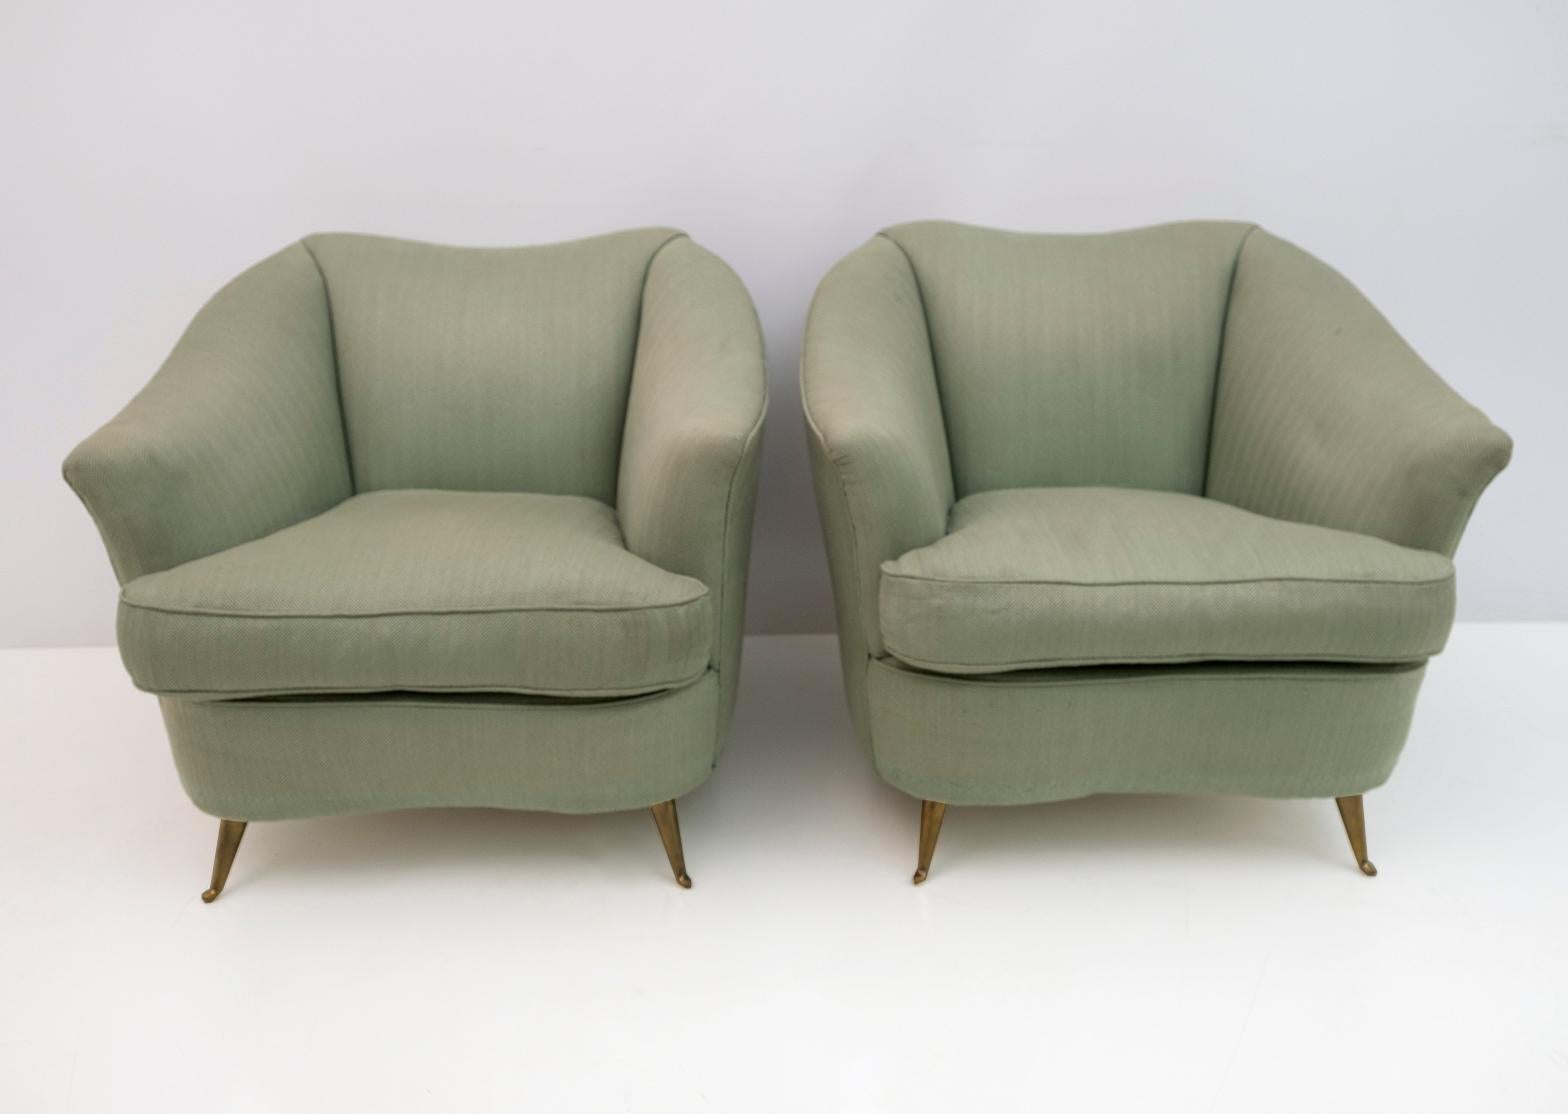 Pair of vintage Italian collectible armchairs designed by Gio Ponti for the Casa e Giardino manufacturing company in the late 1930s.
The upholstery was redone more than 20 years ago but is not in good condition, new upholstery is recommended.